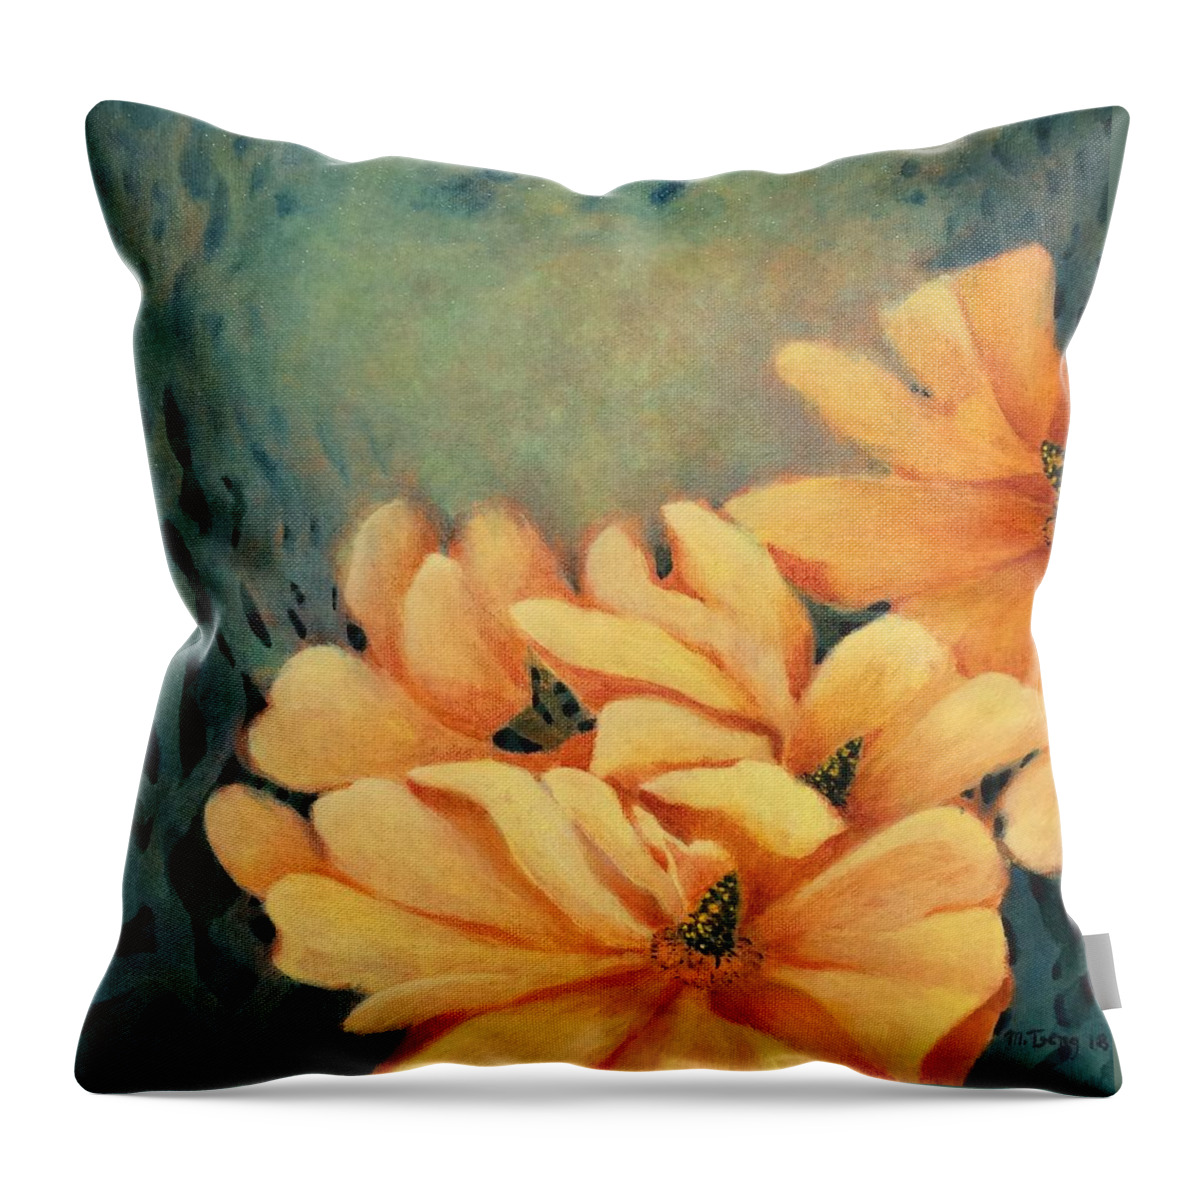 Framed Prints Throw Pillow featuring the painting Light by Milly Tseng